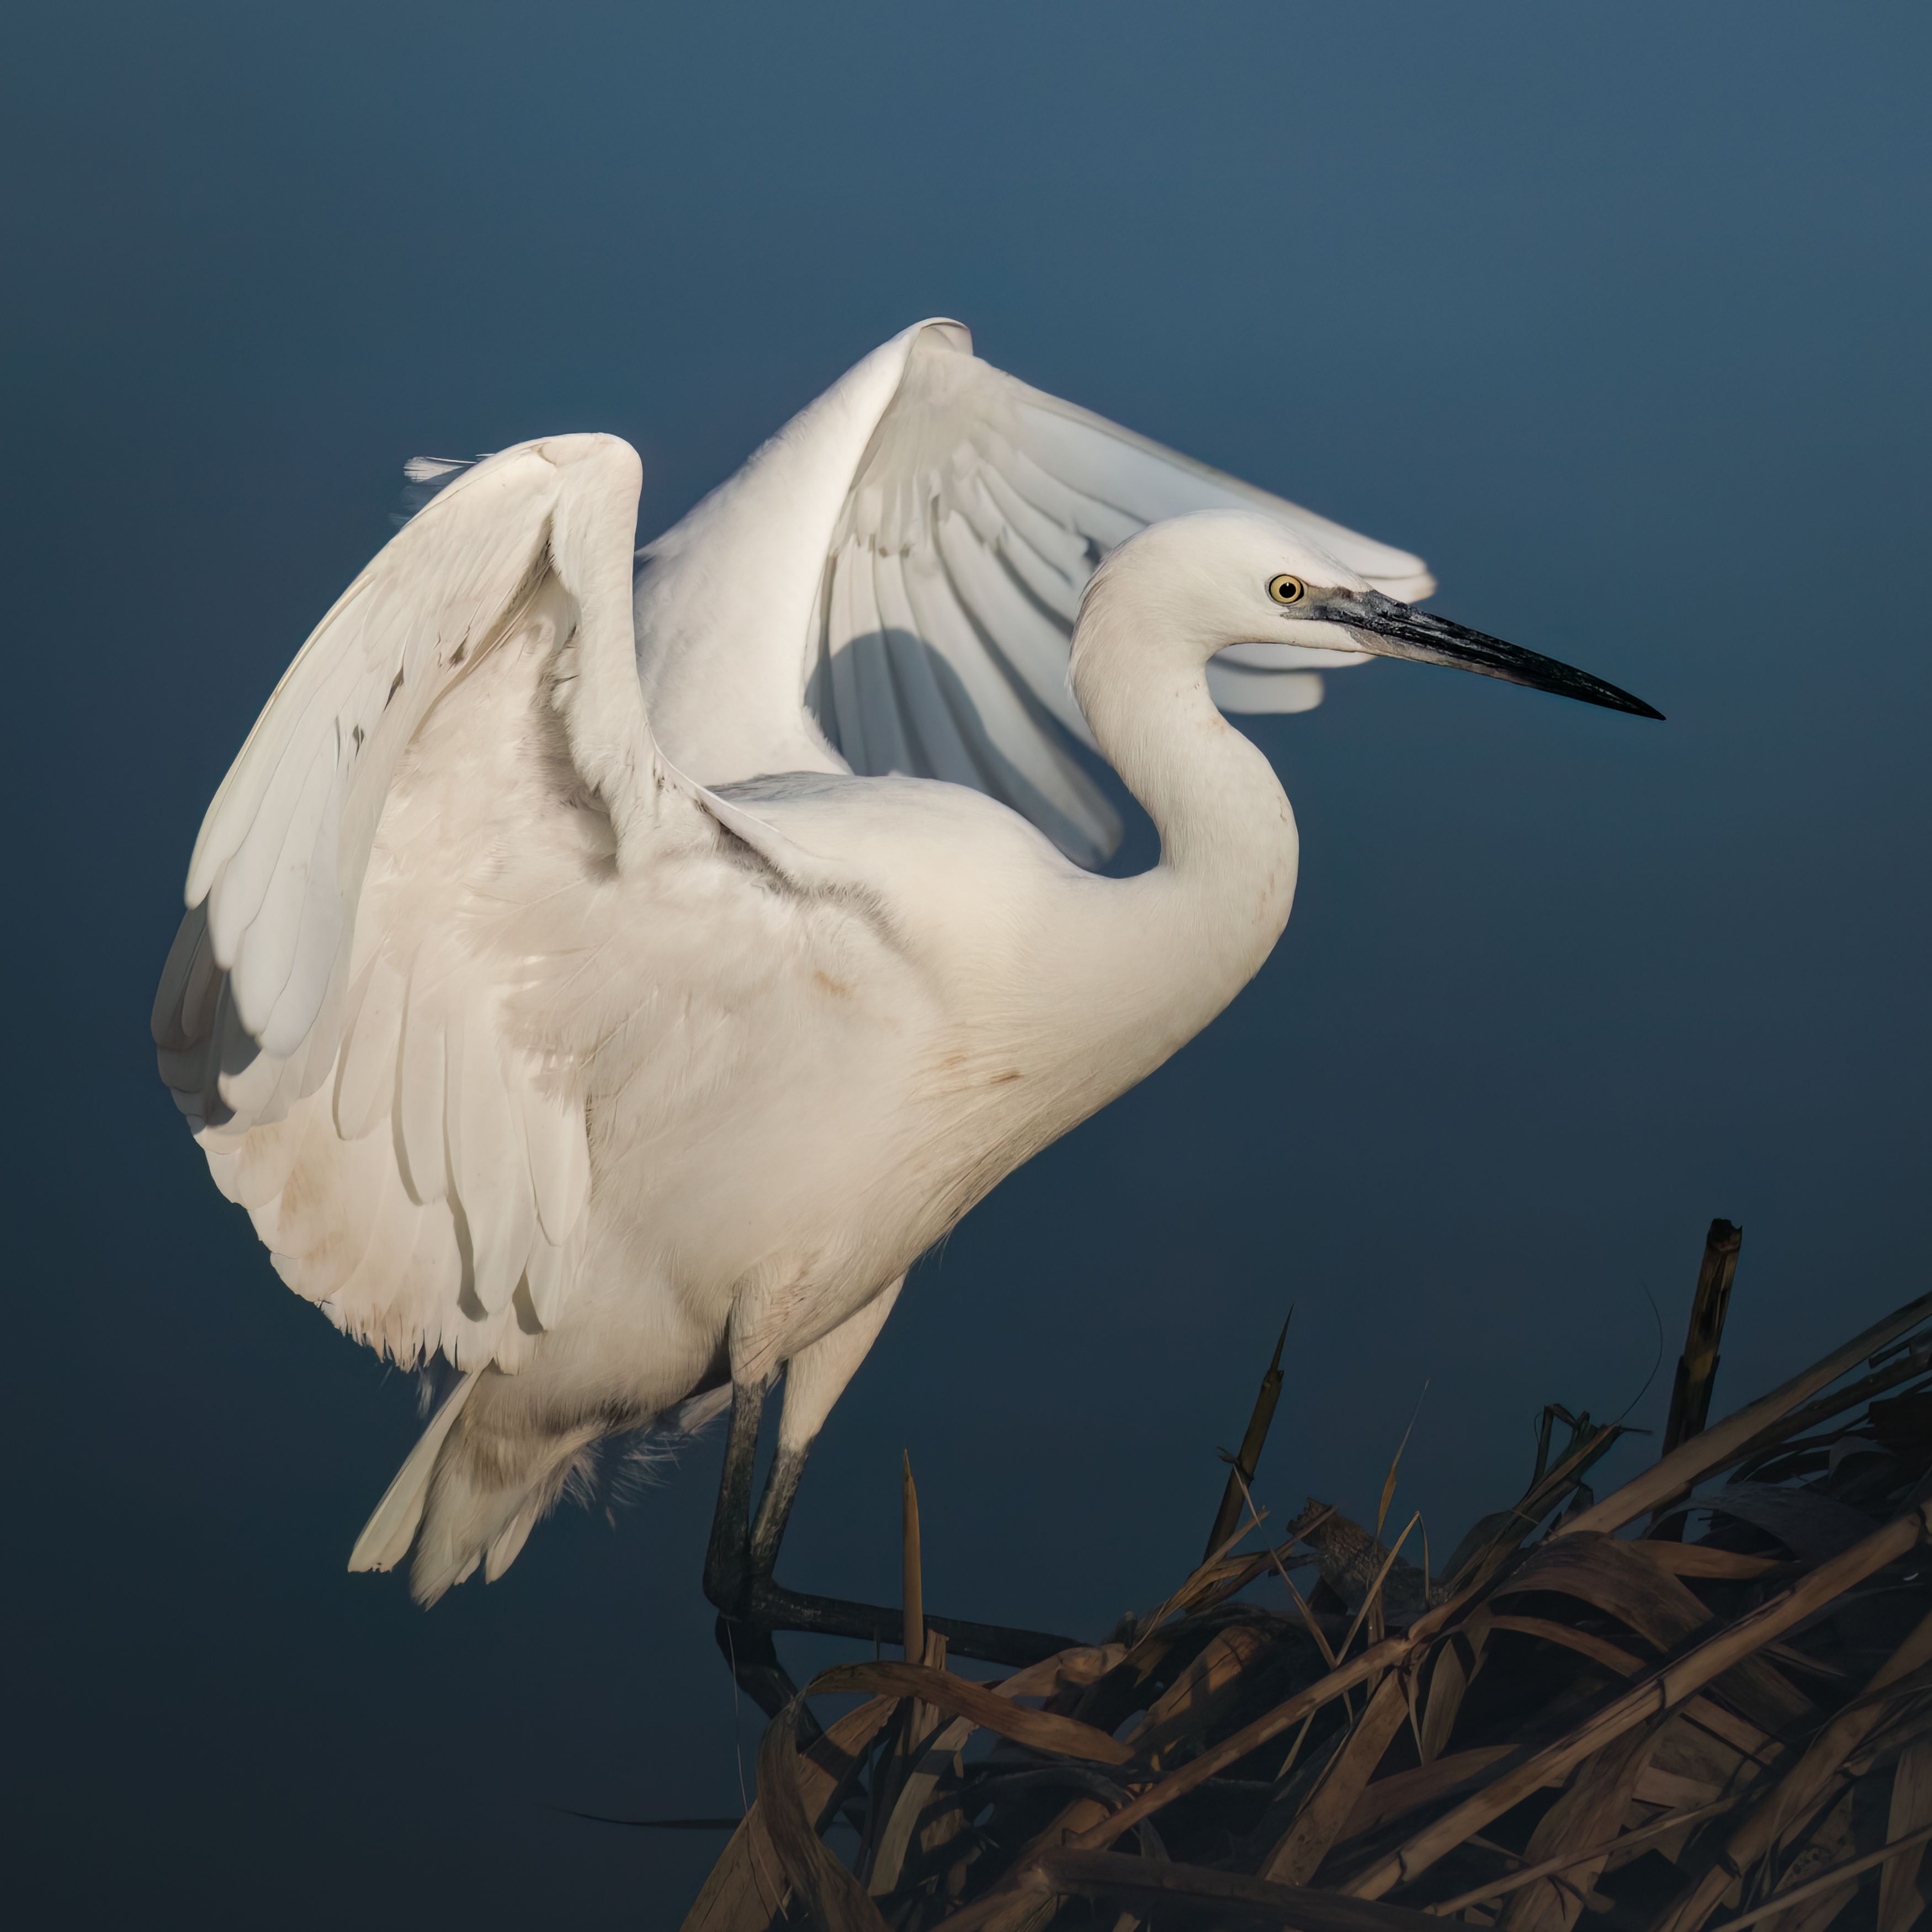 little egret, egret, egrets, bird, birds, animal, animals, wing, wings, feather, feathers, water, river, sun, sun, sunny, day, Ahmed Zaeitar